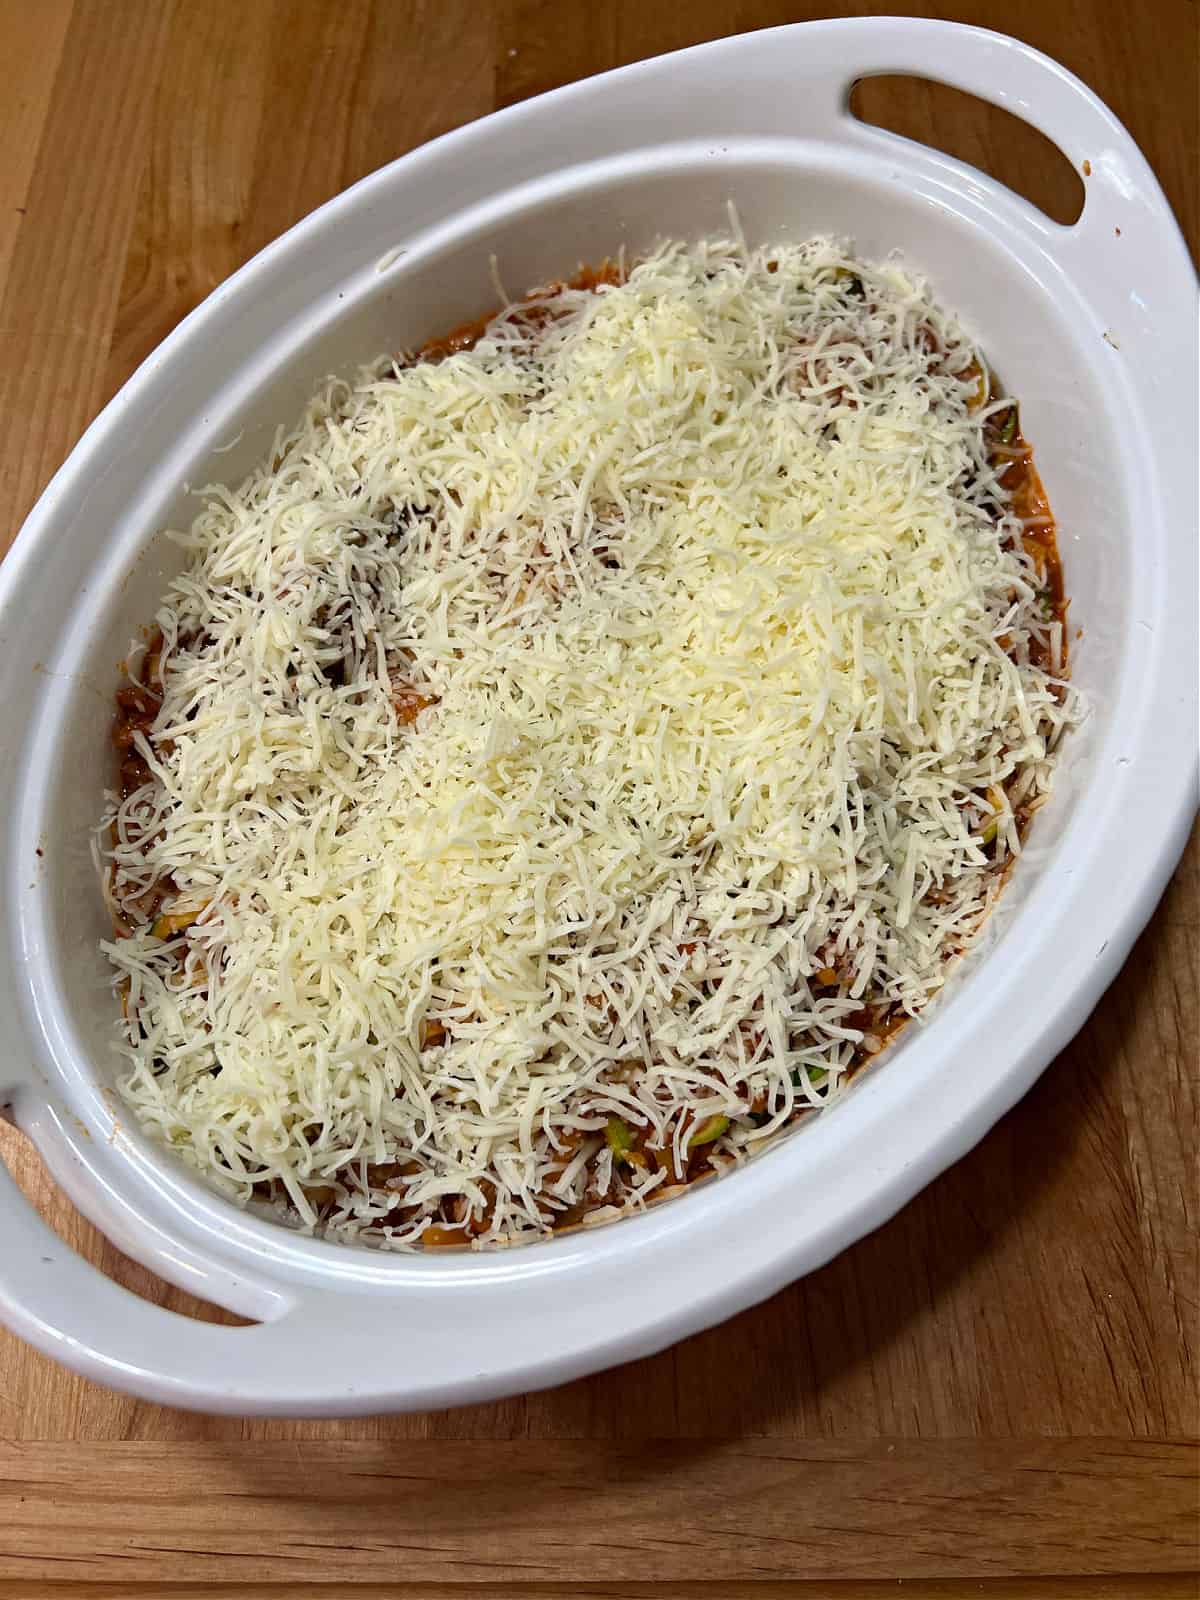 Mixture placed in a casserole dish with shredded cheese on top.